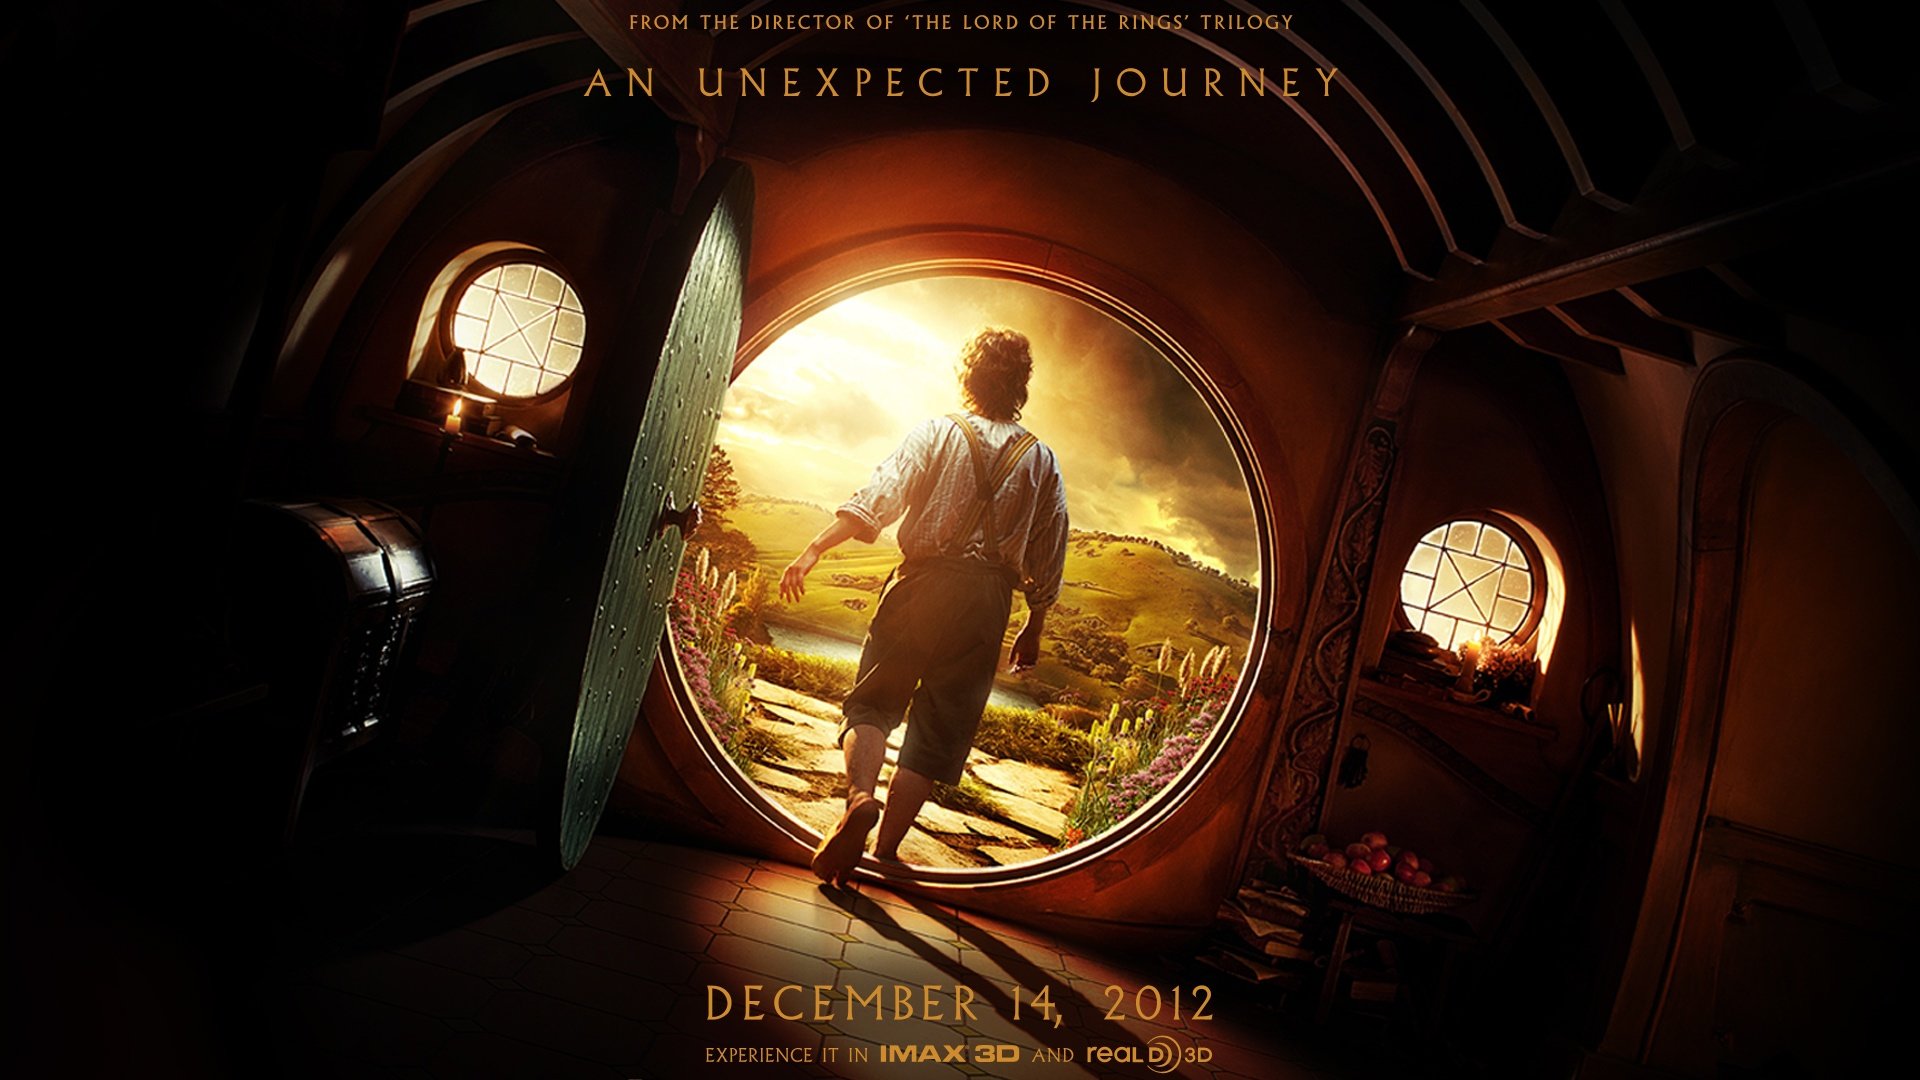 Best The Hobbit: An Unexpected Journey wallpaper ID:463992 for High Resolution full hd 1080p computer